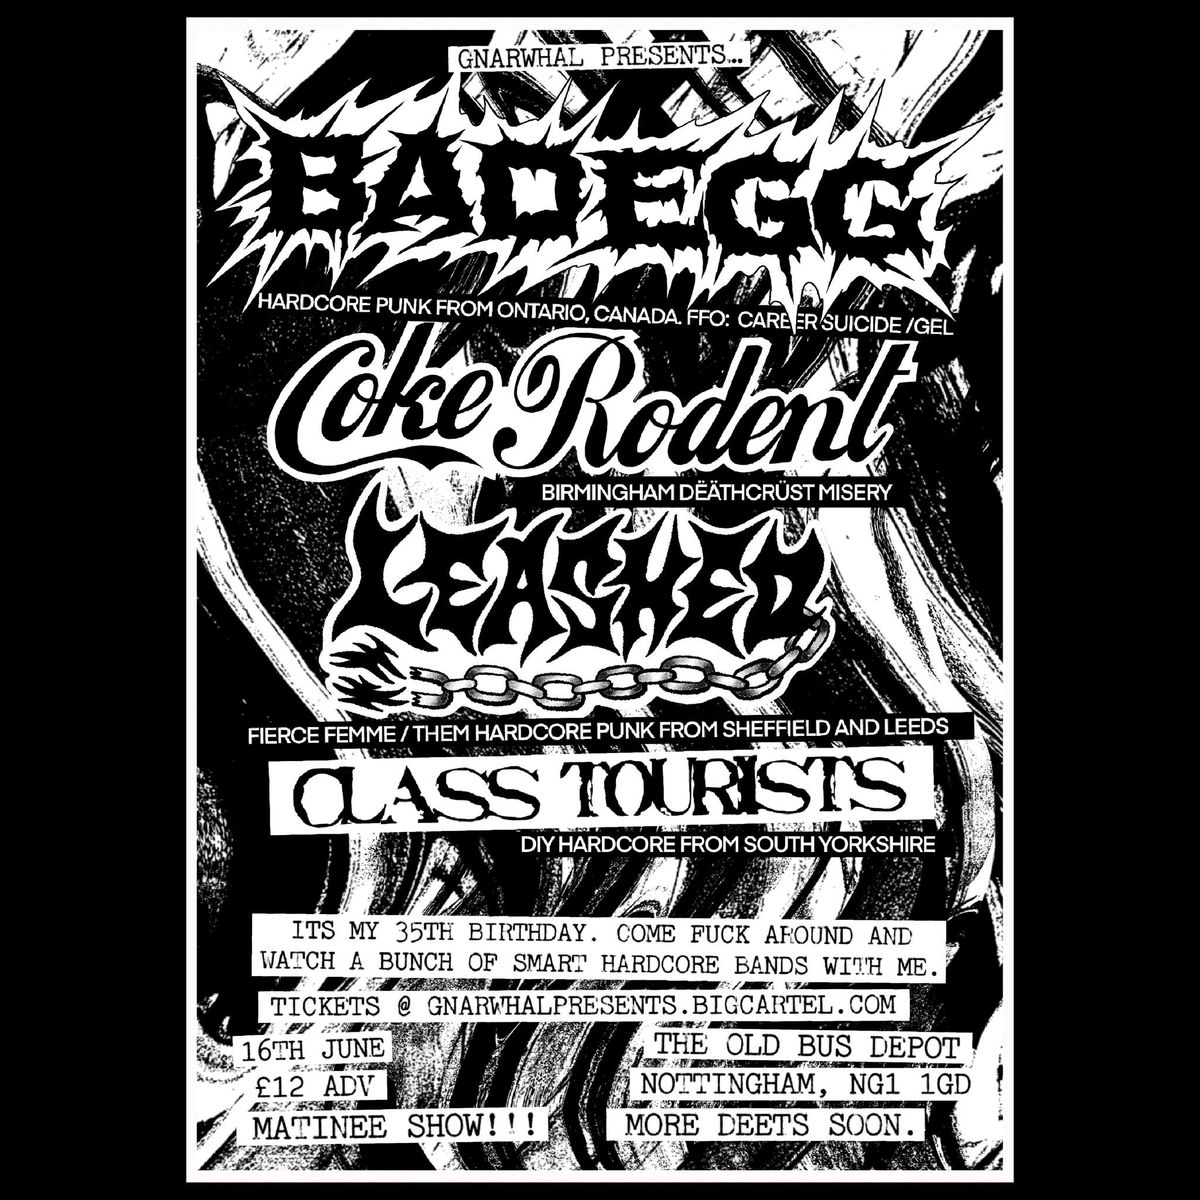 Bad Egg (CA) \/ Coke Rodent \/ Leashed \/ Class Tourists @ The Old Bus Depot